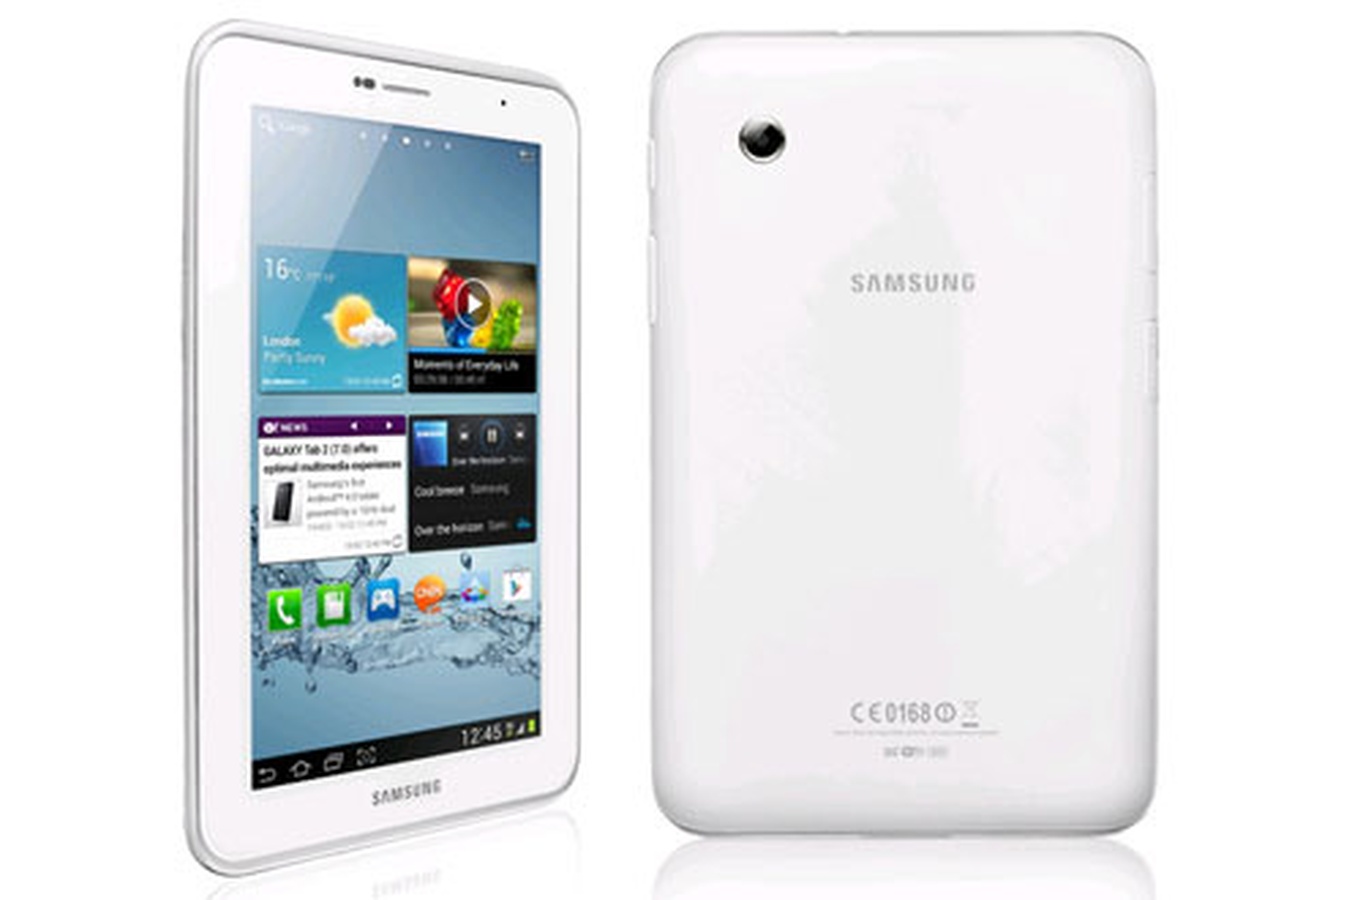 Tablette tactile Darty - Tablette tactile Samsung GALAXY TAB 2 7" WIFI 8 Go SILVER